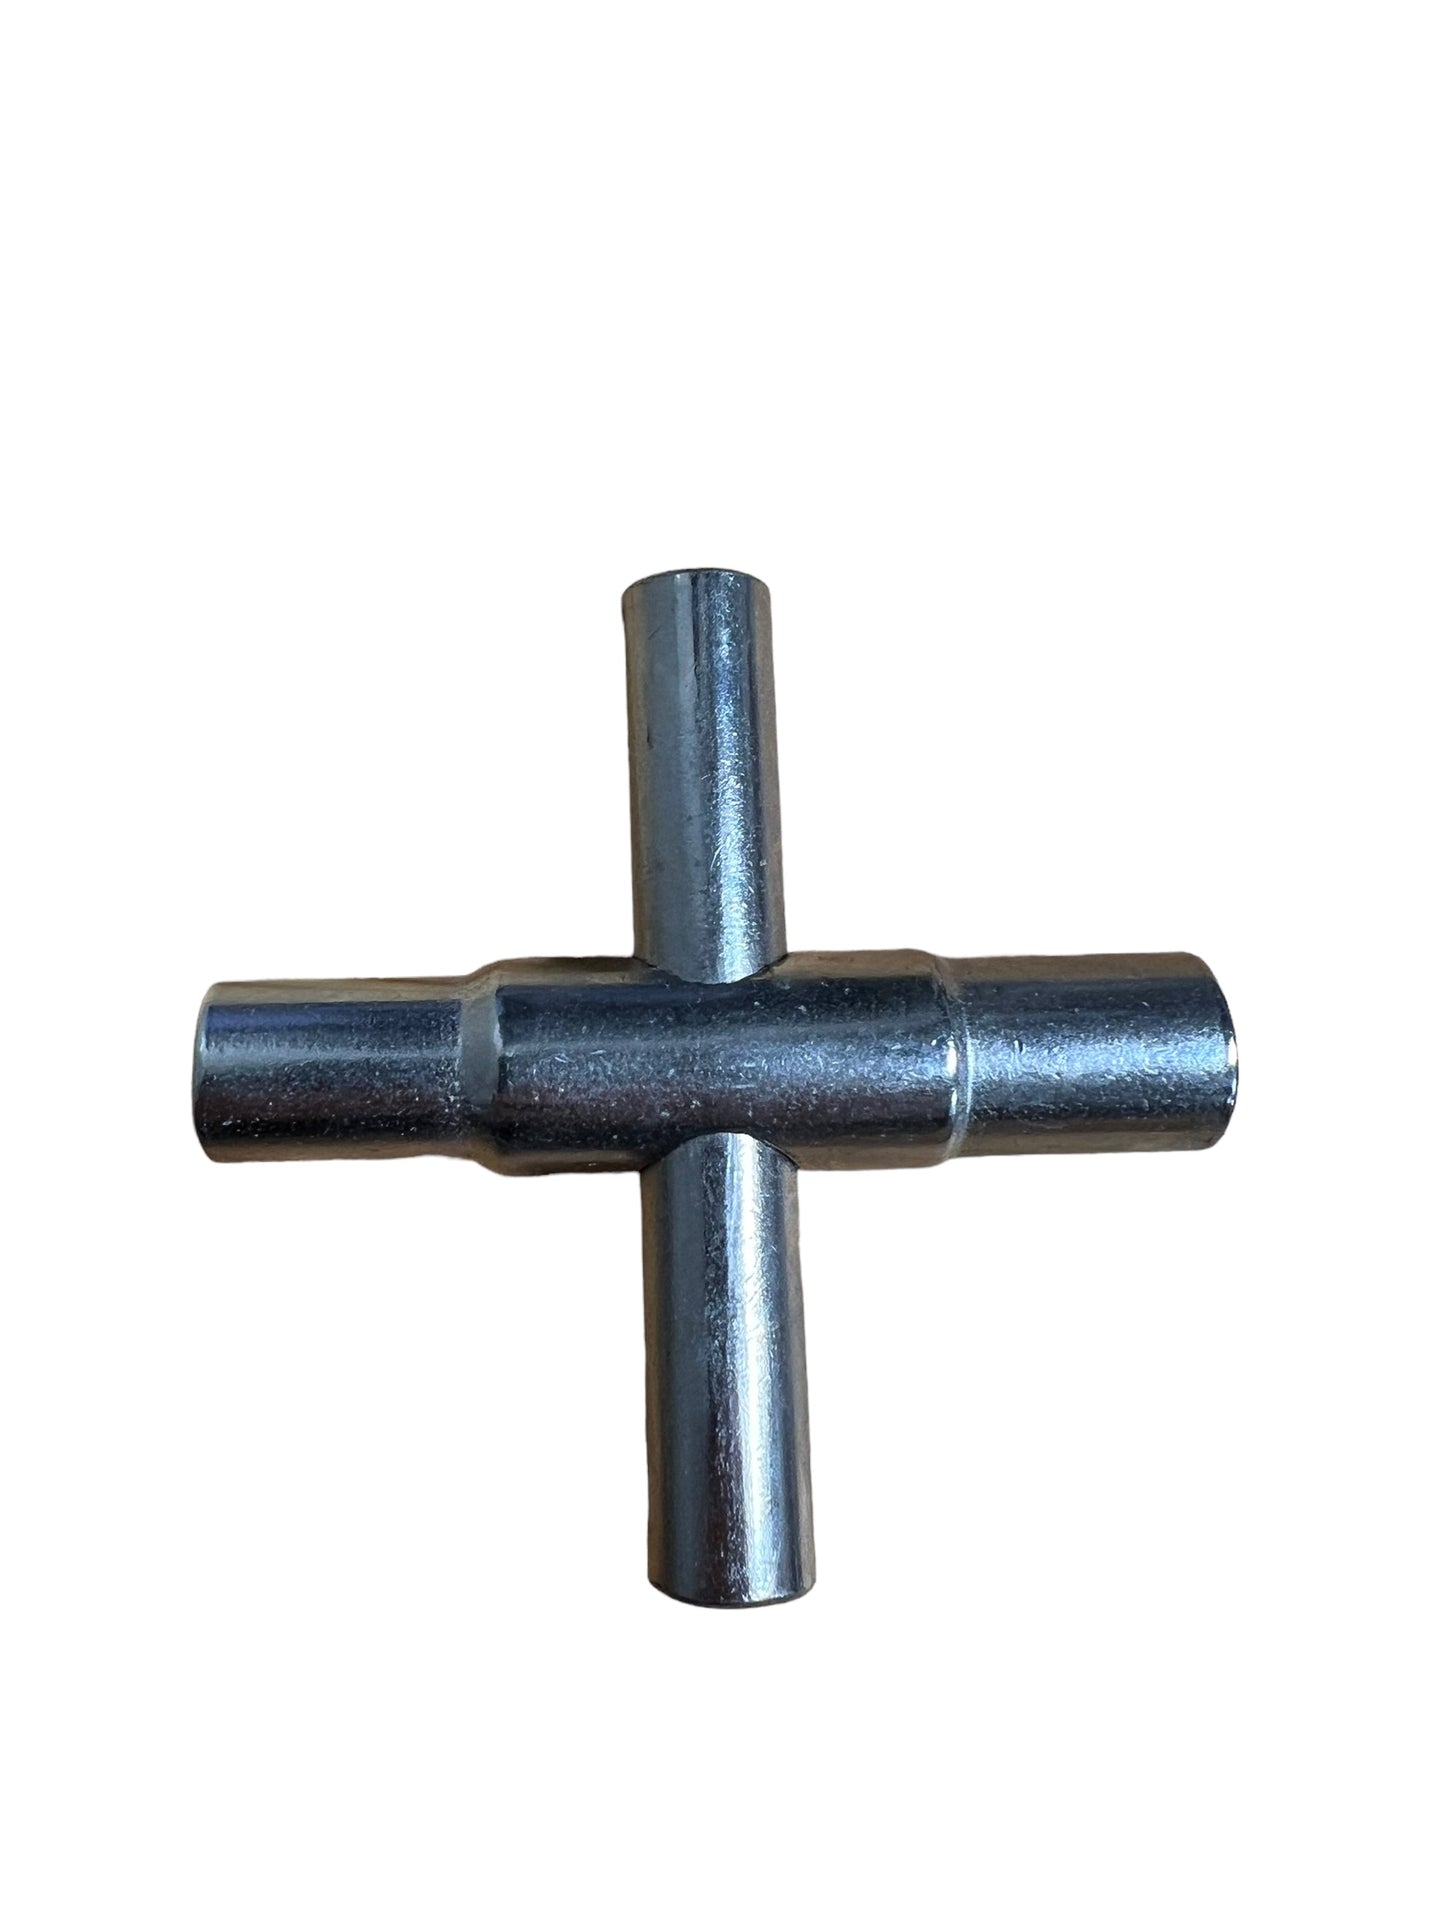 Silcock Key - Commercial Water Spigot Tool